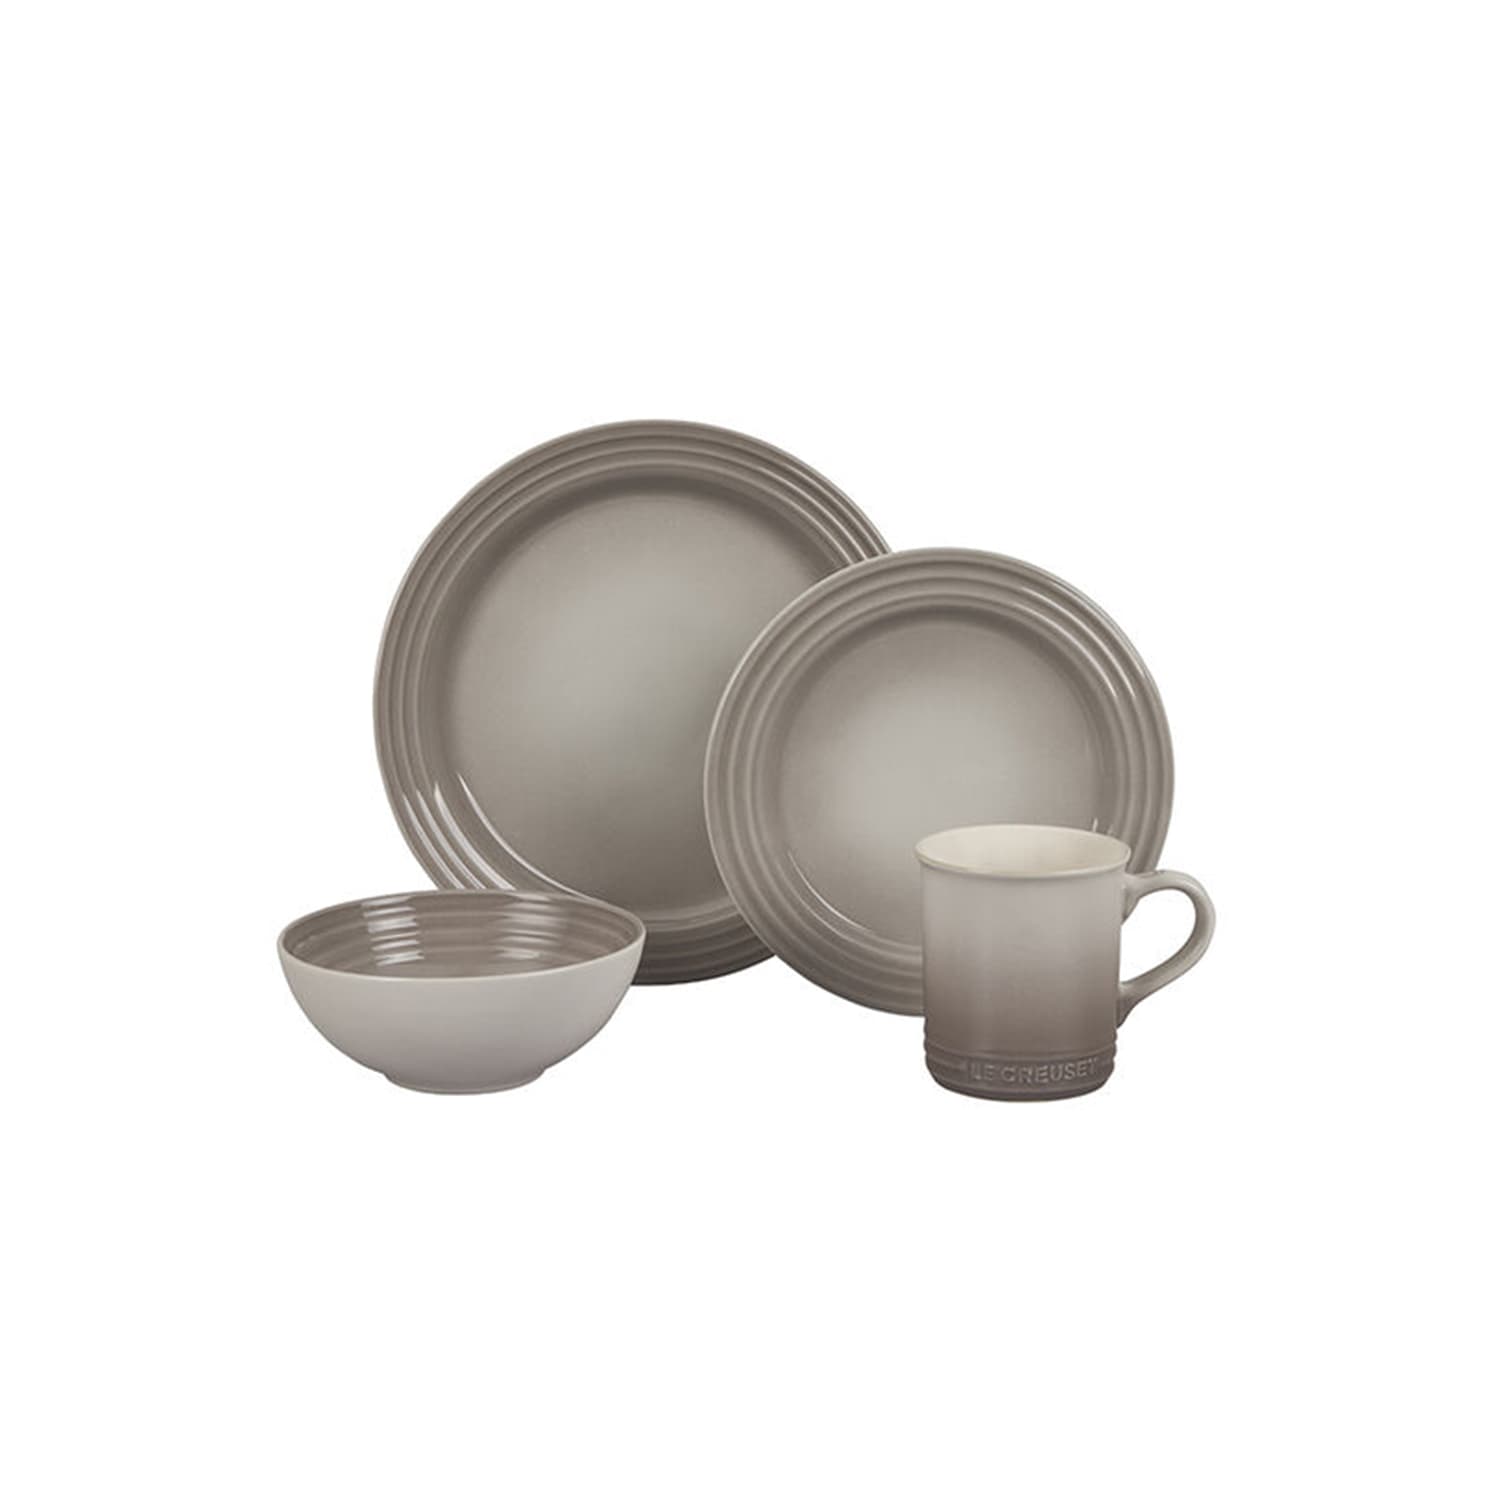 http://cdn.apartmenttherapy.info/image/upload/v1684604118/at/product%20listing/le-creuset-dinnerset.jpg